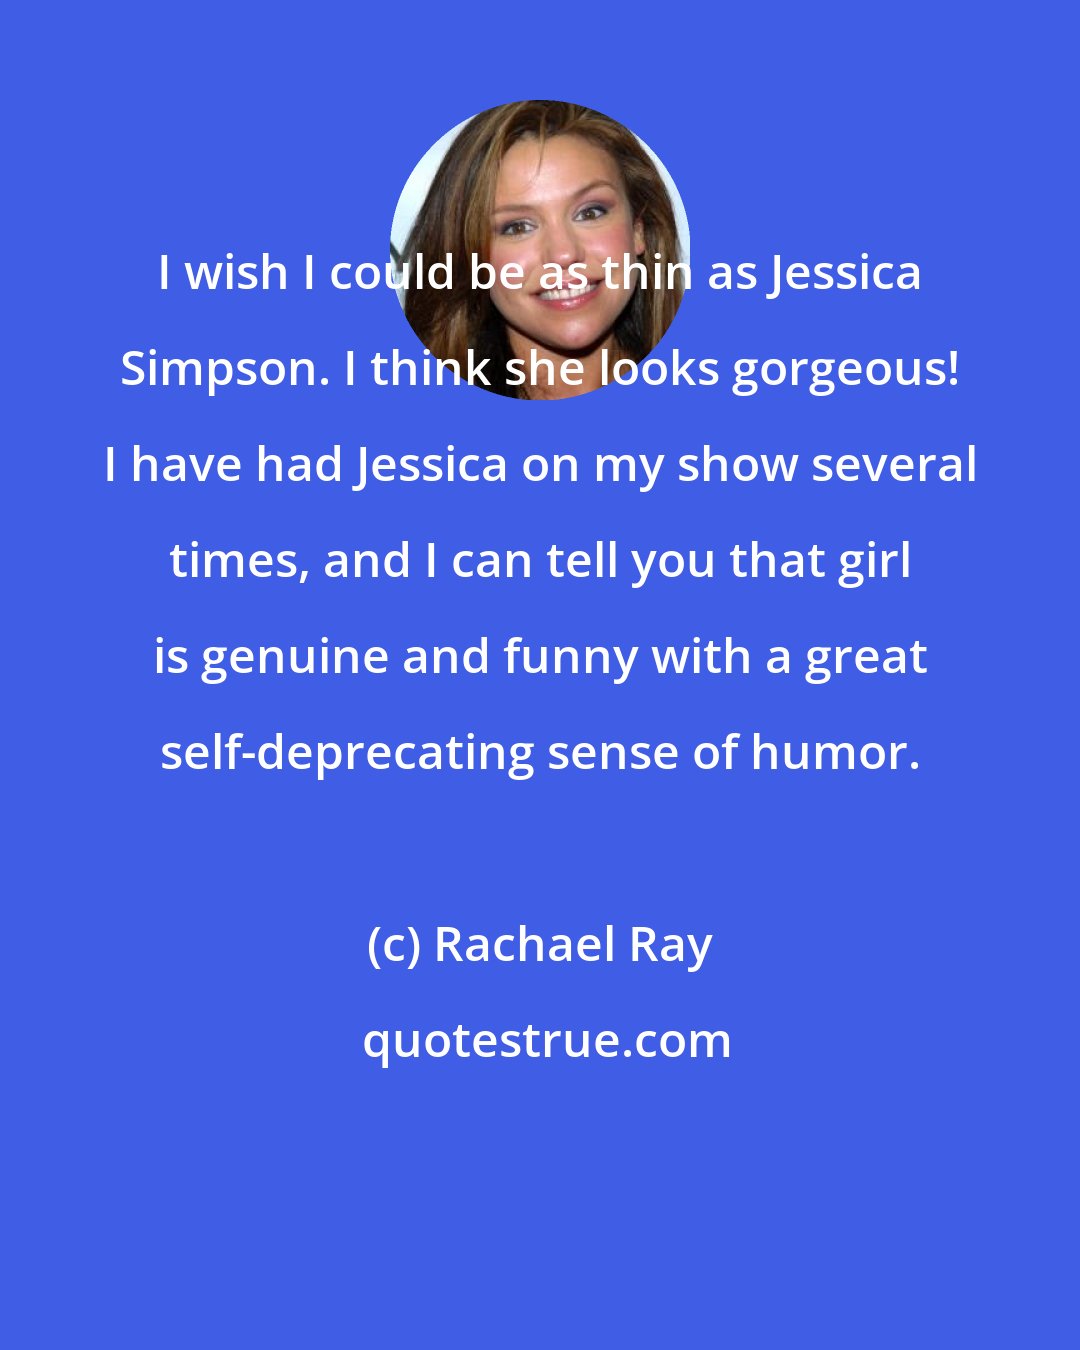 Rachael Ray: I wish I could be as thin as Jessica Simpson. I think she looks gorgeous! I have had Jessica on my show several times, and I can tell you that girl is genuine and funny with a great self-deprecating sense of humor.